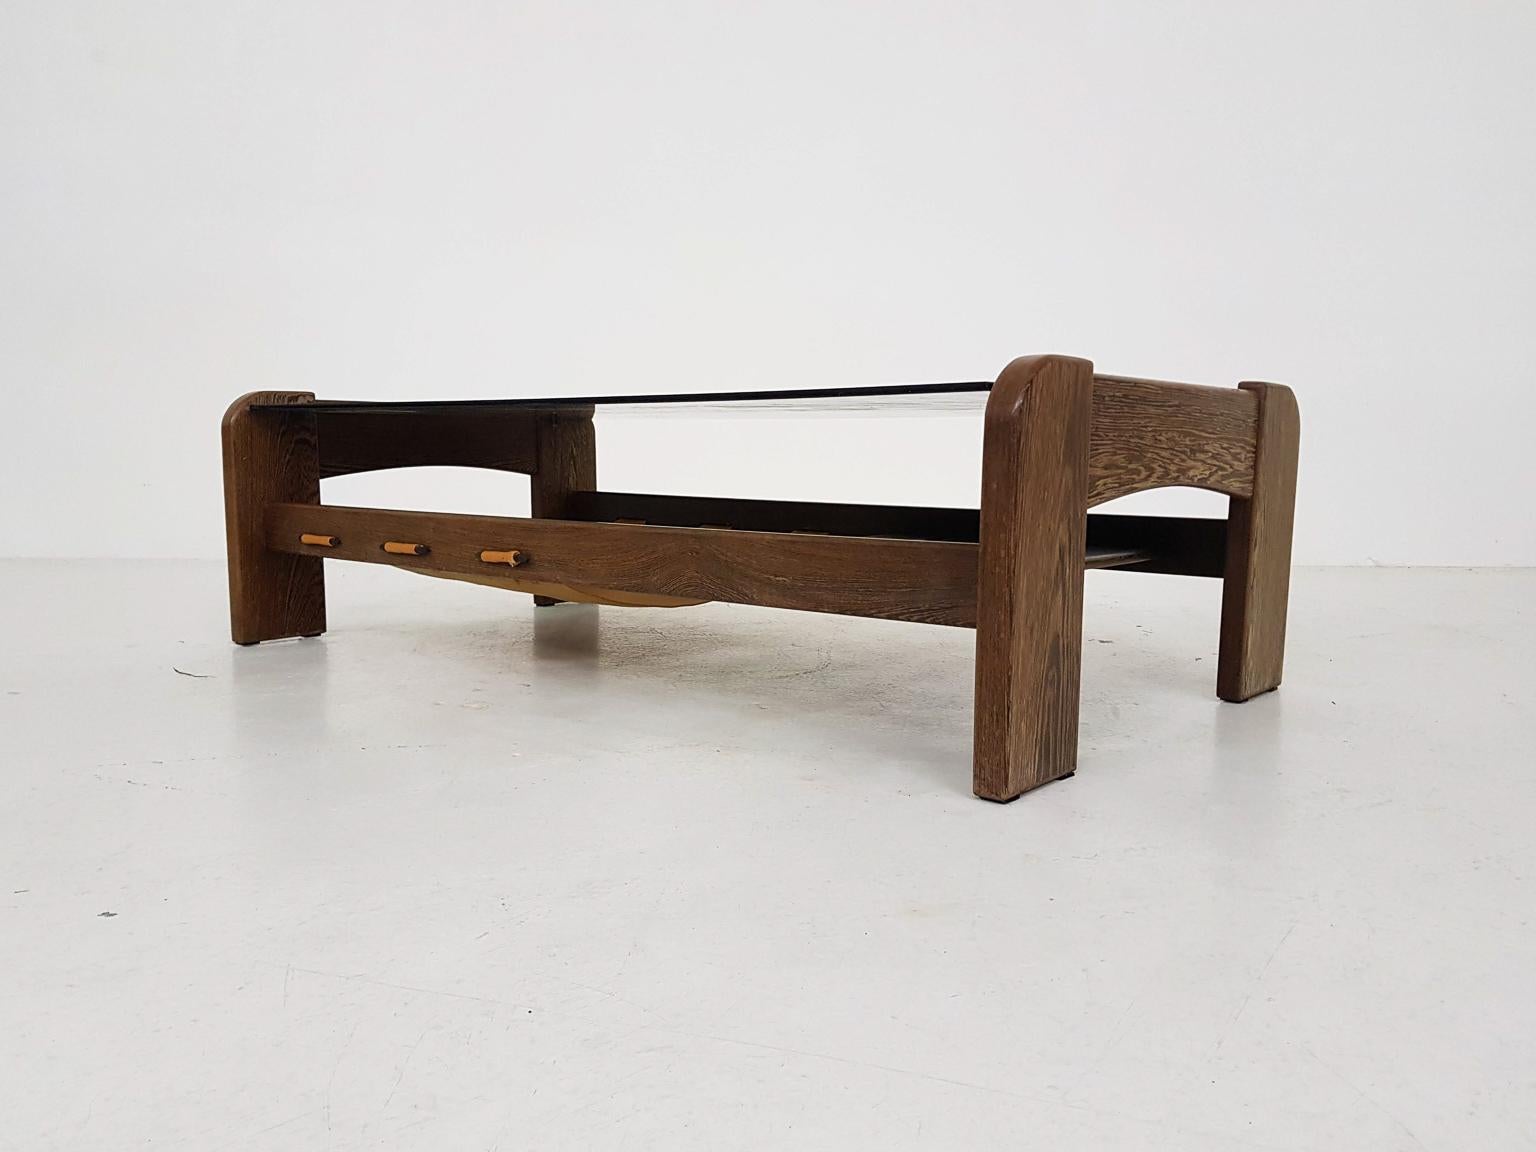 20th Century Percival Lafer Attributed Glass, Wenge and Leather Coffee Table, Brasil, 1970s